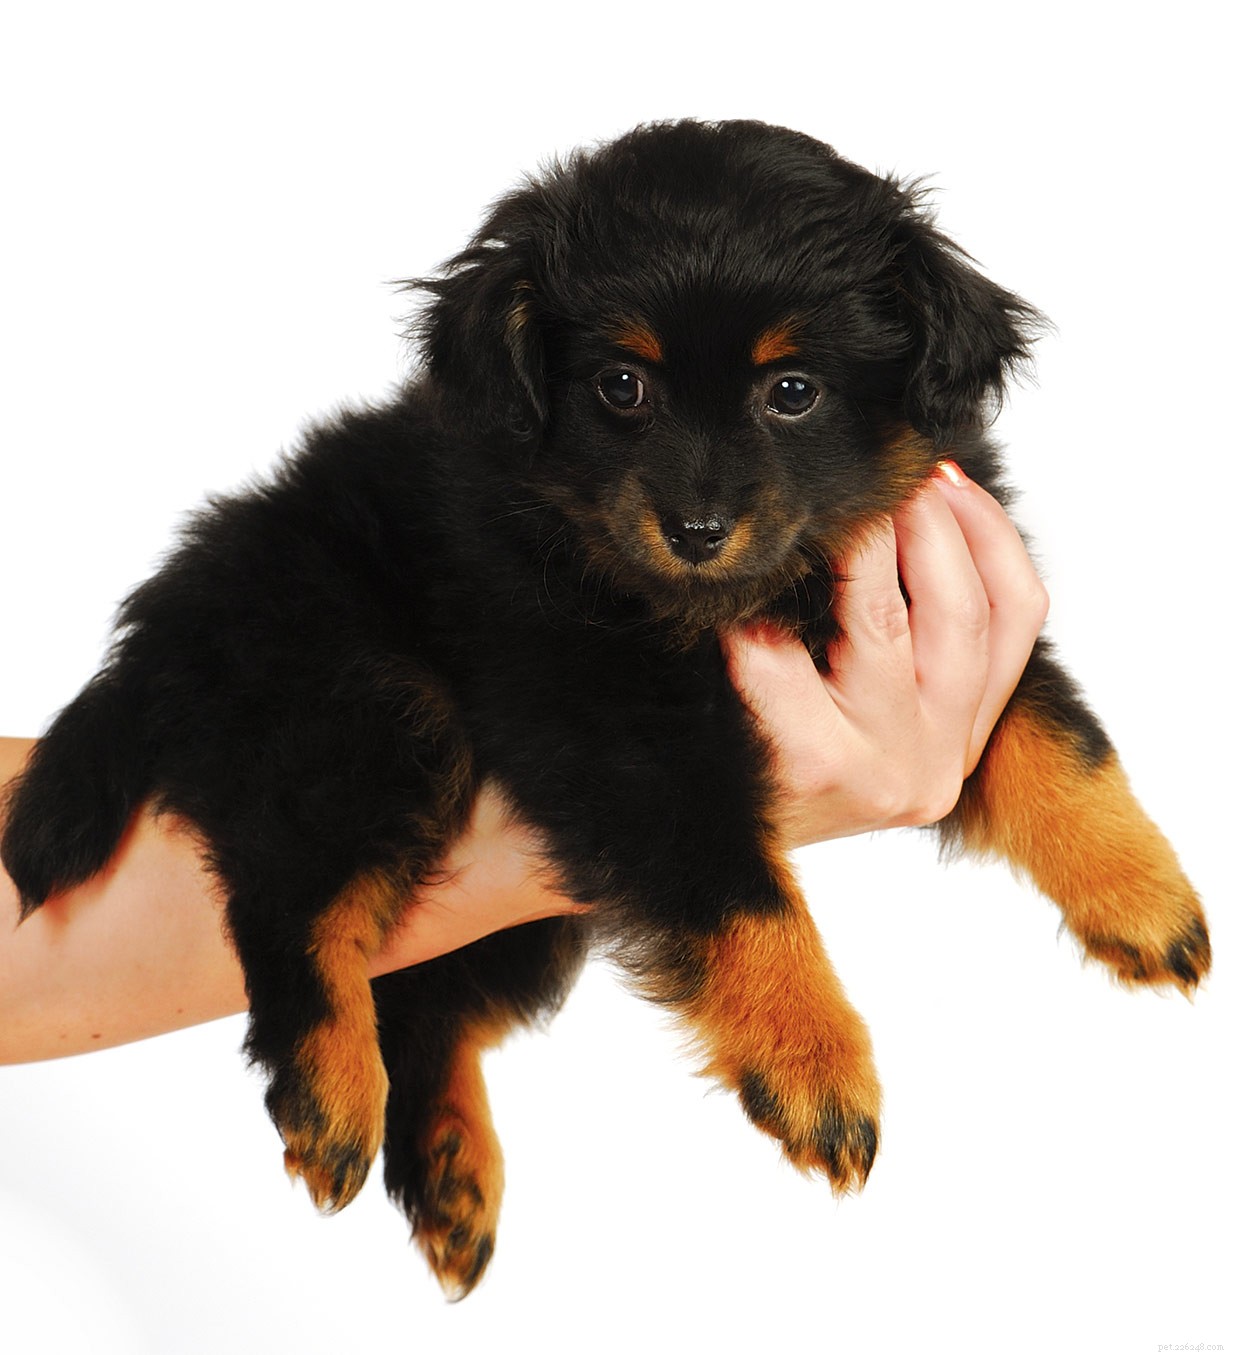 Yorkipoo Dog – The Complete Yorkie Poodle Mix Breed Guide